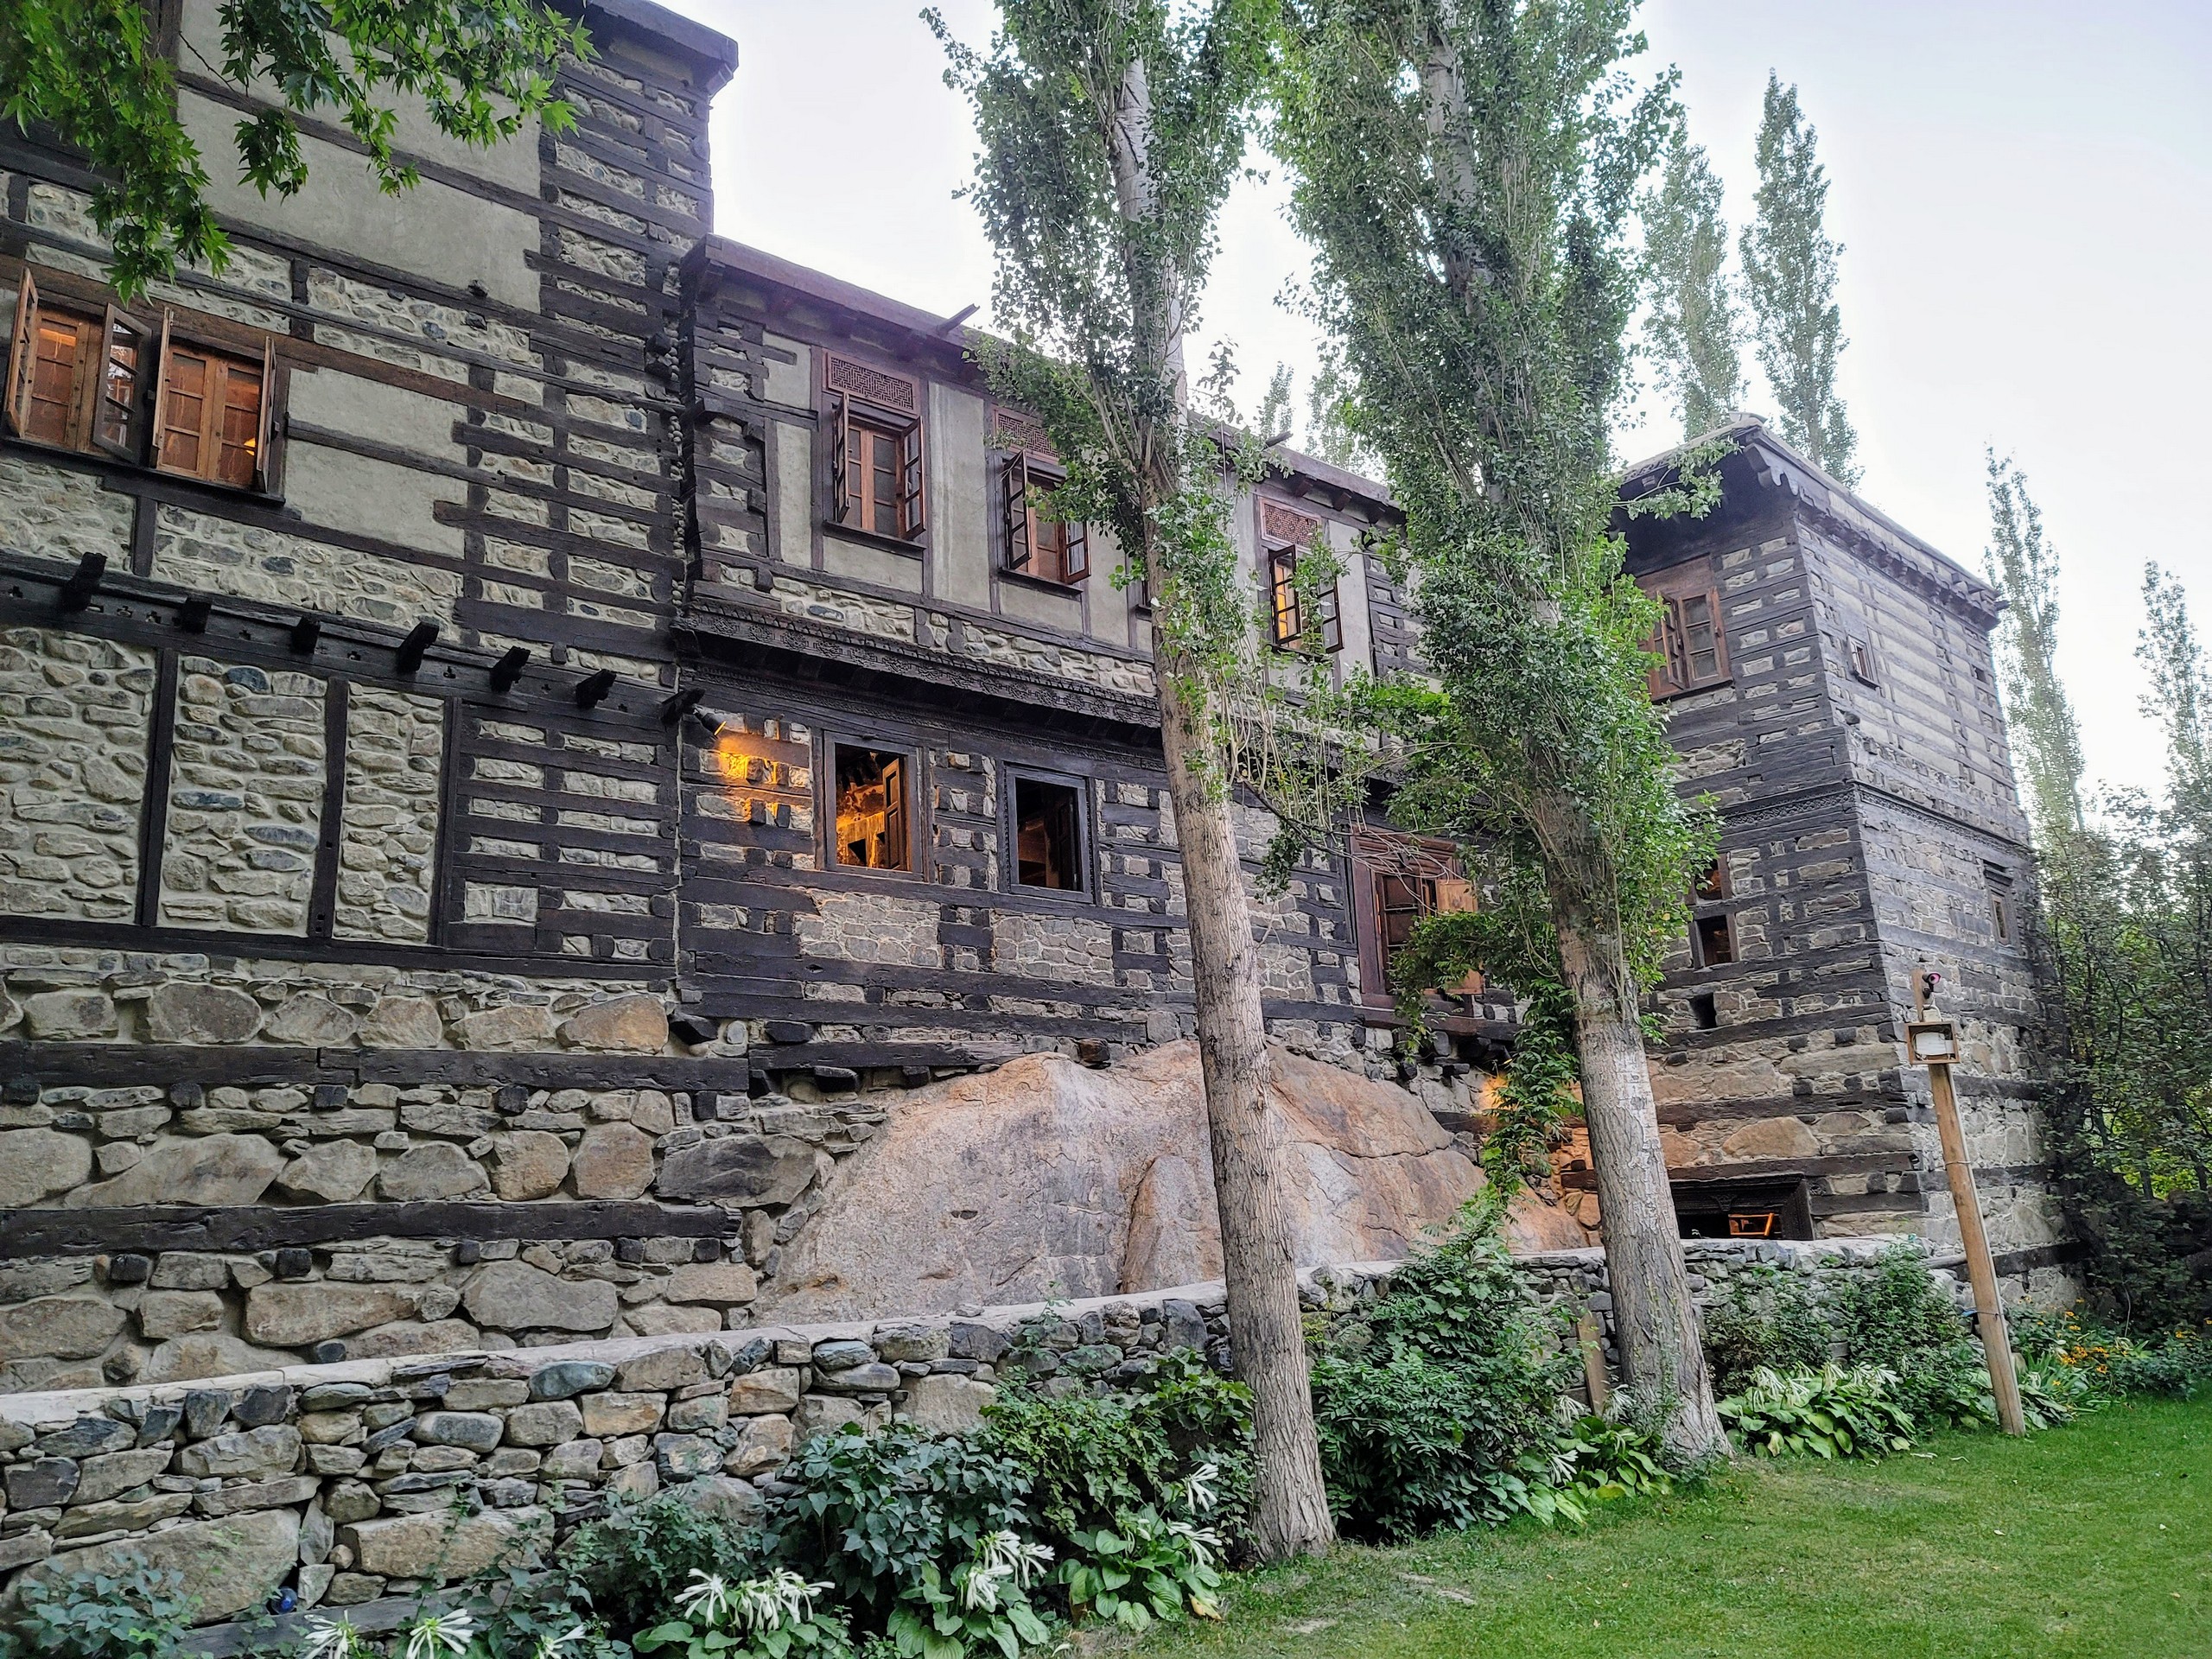 Shigar Fort seen while exploring Skardu and Hunza regions in Pakistan